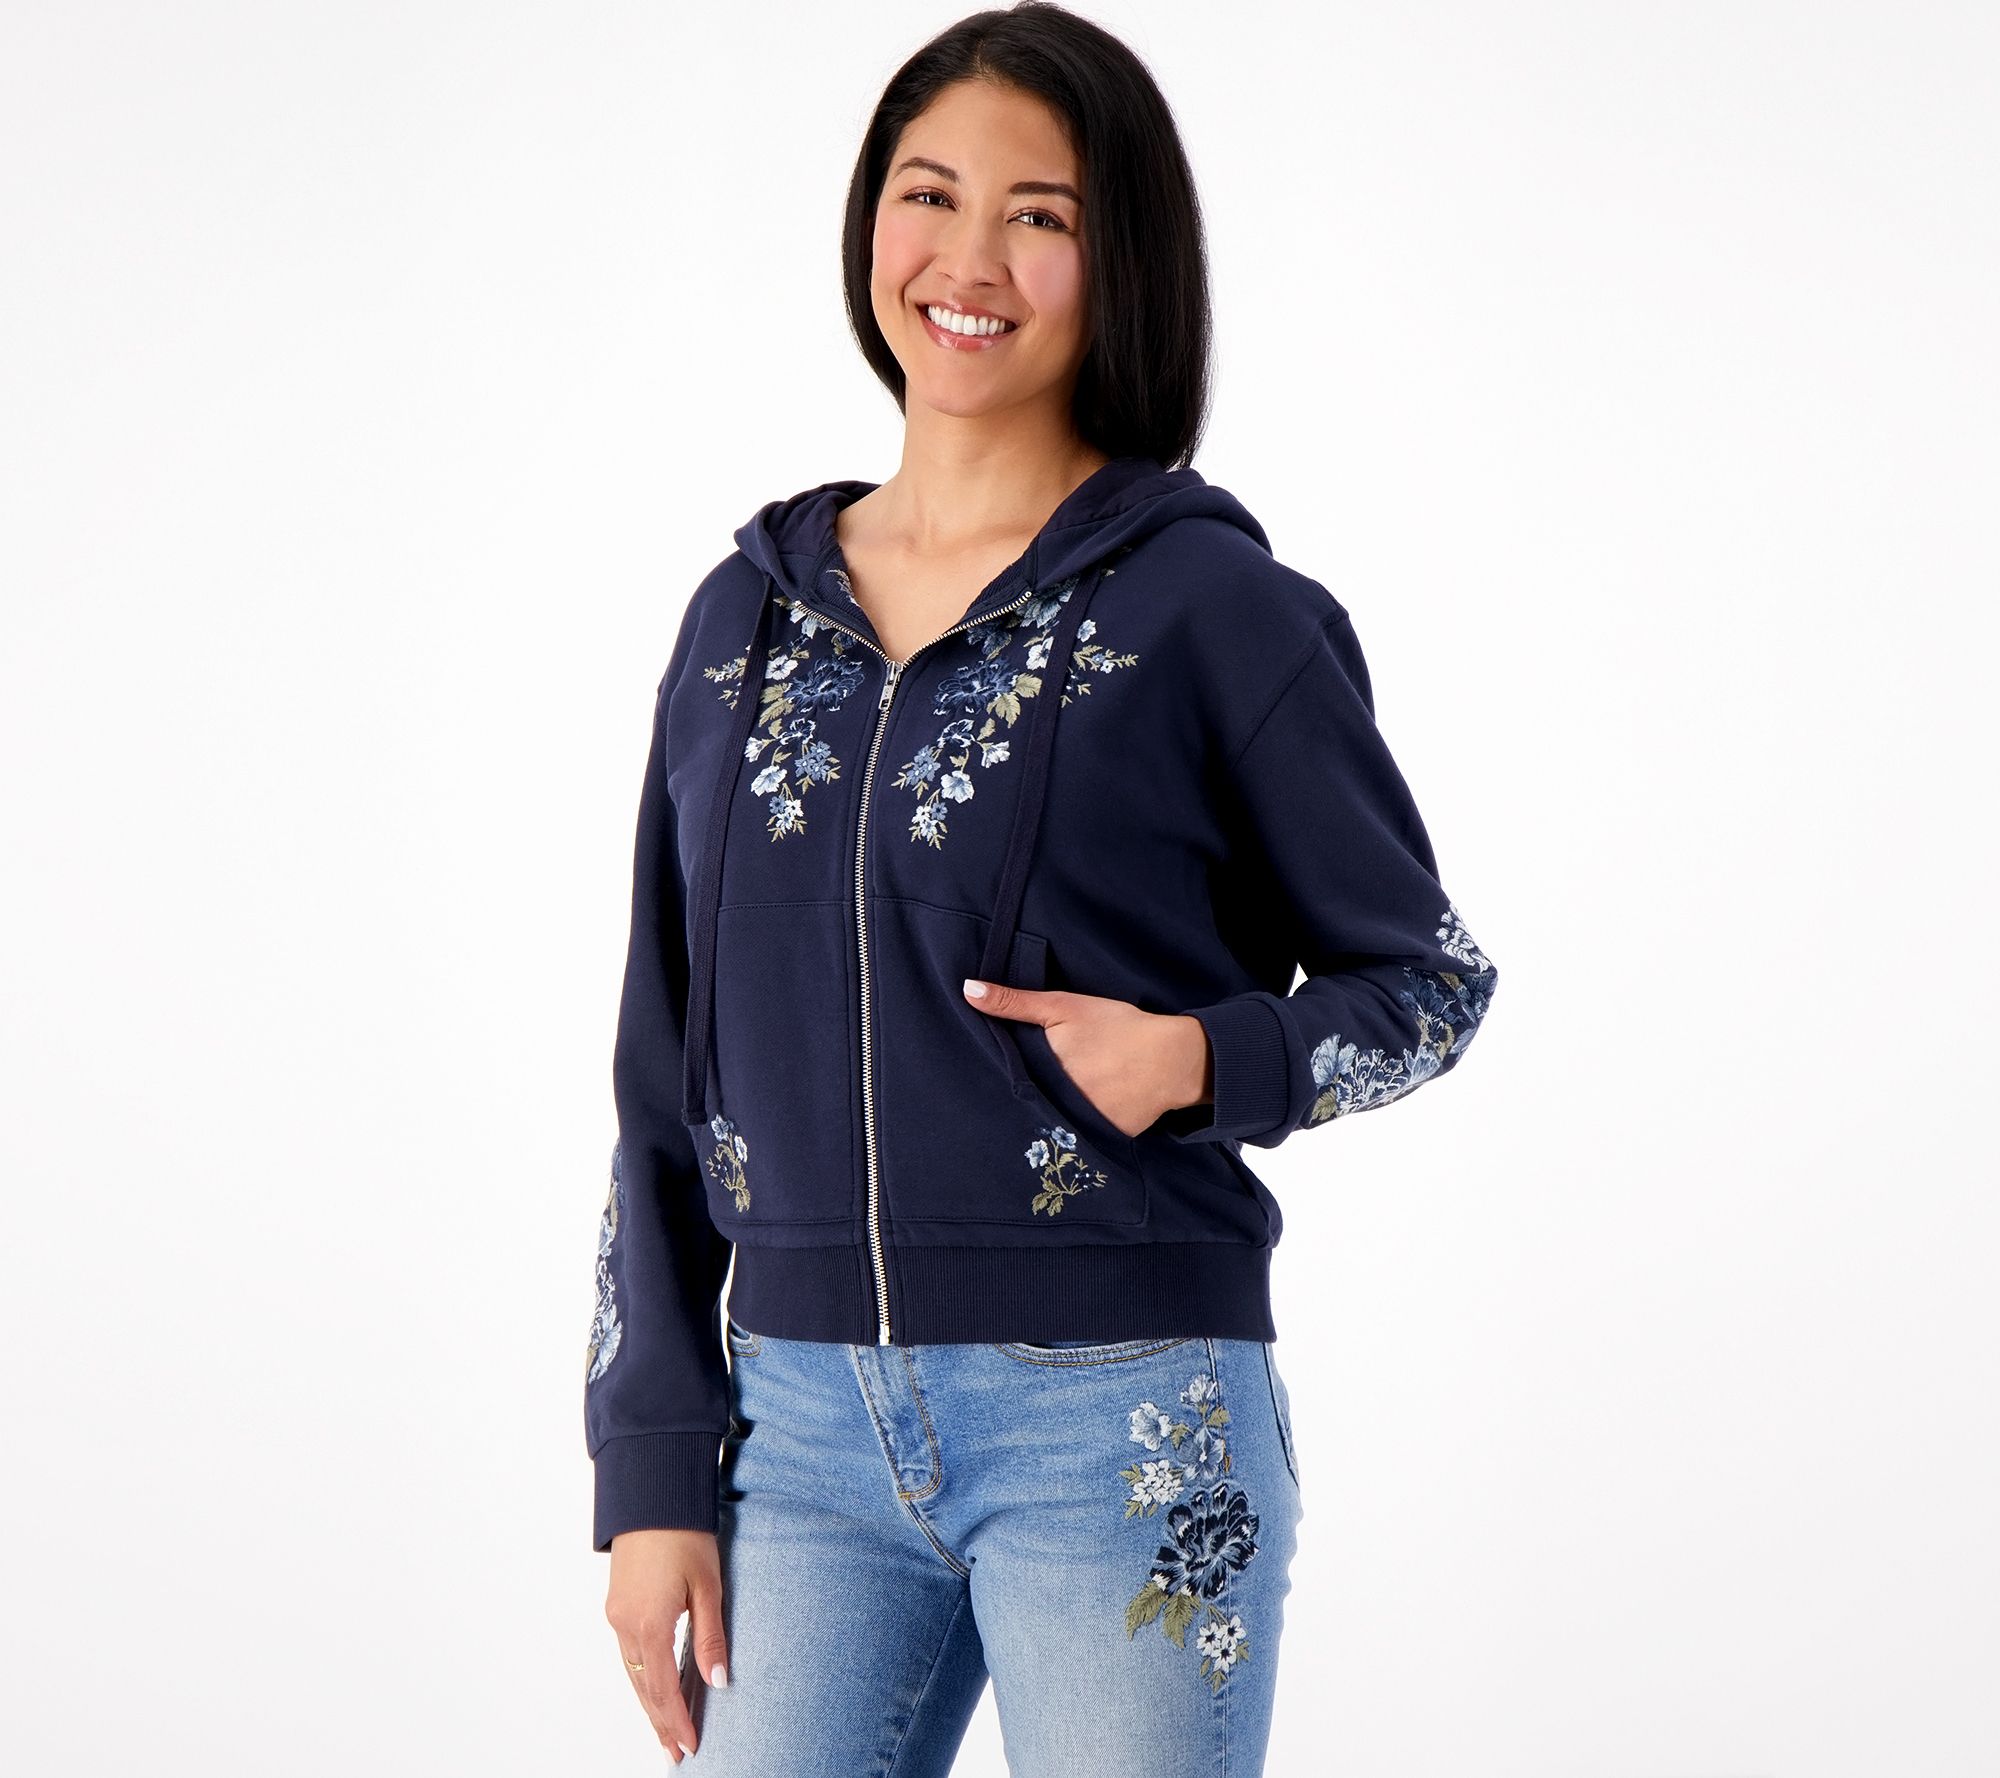 Driftwood Jeans Embroidered Hoodie- Fleur Bell Zip-Up Blue